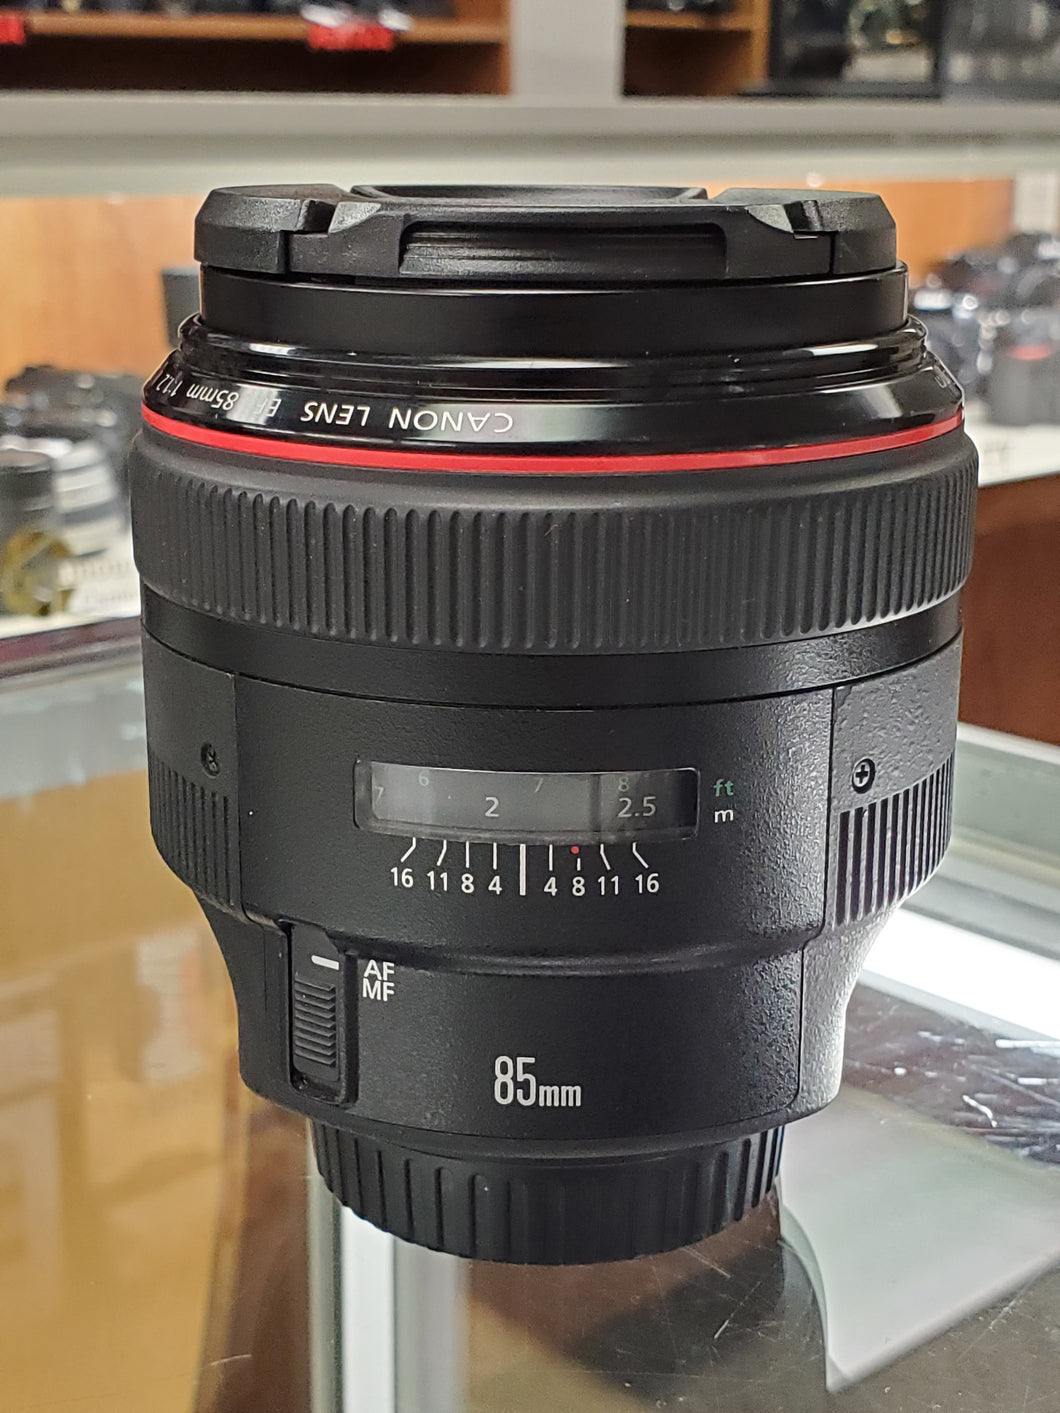 Rare Monster the Canon EF 85mm f/1.2L II USM - Pro Full Frame Telephoto - Used Condition 9.5/10 - Paramount Camera & Repair